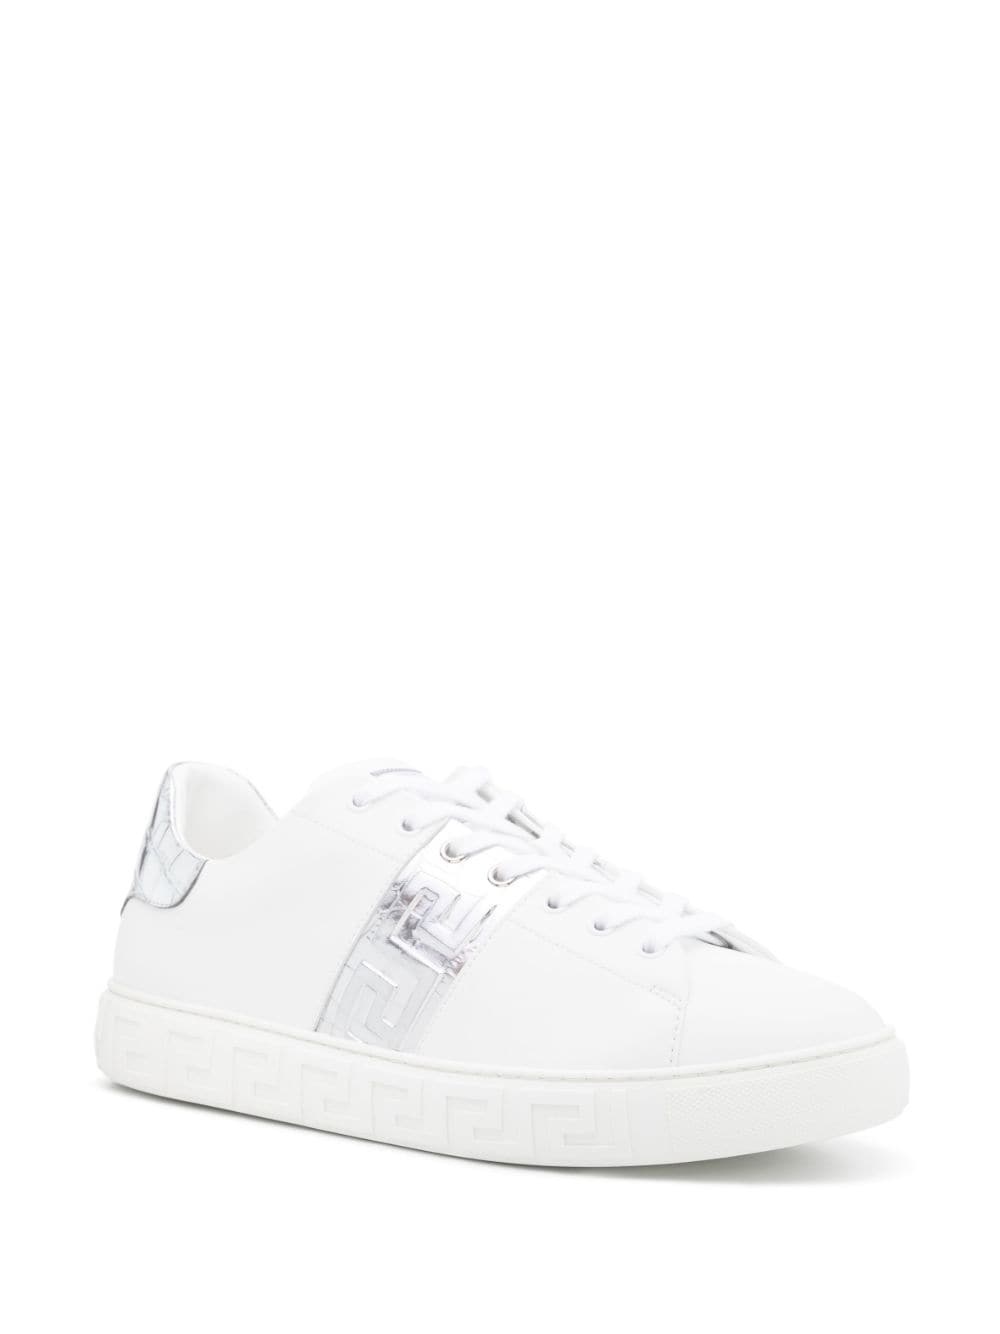 Greca-detail leather sneakers - 2